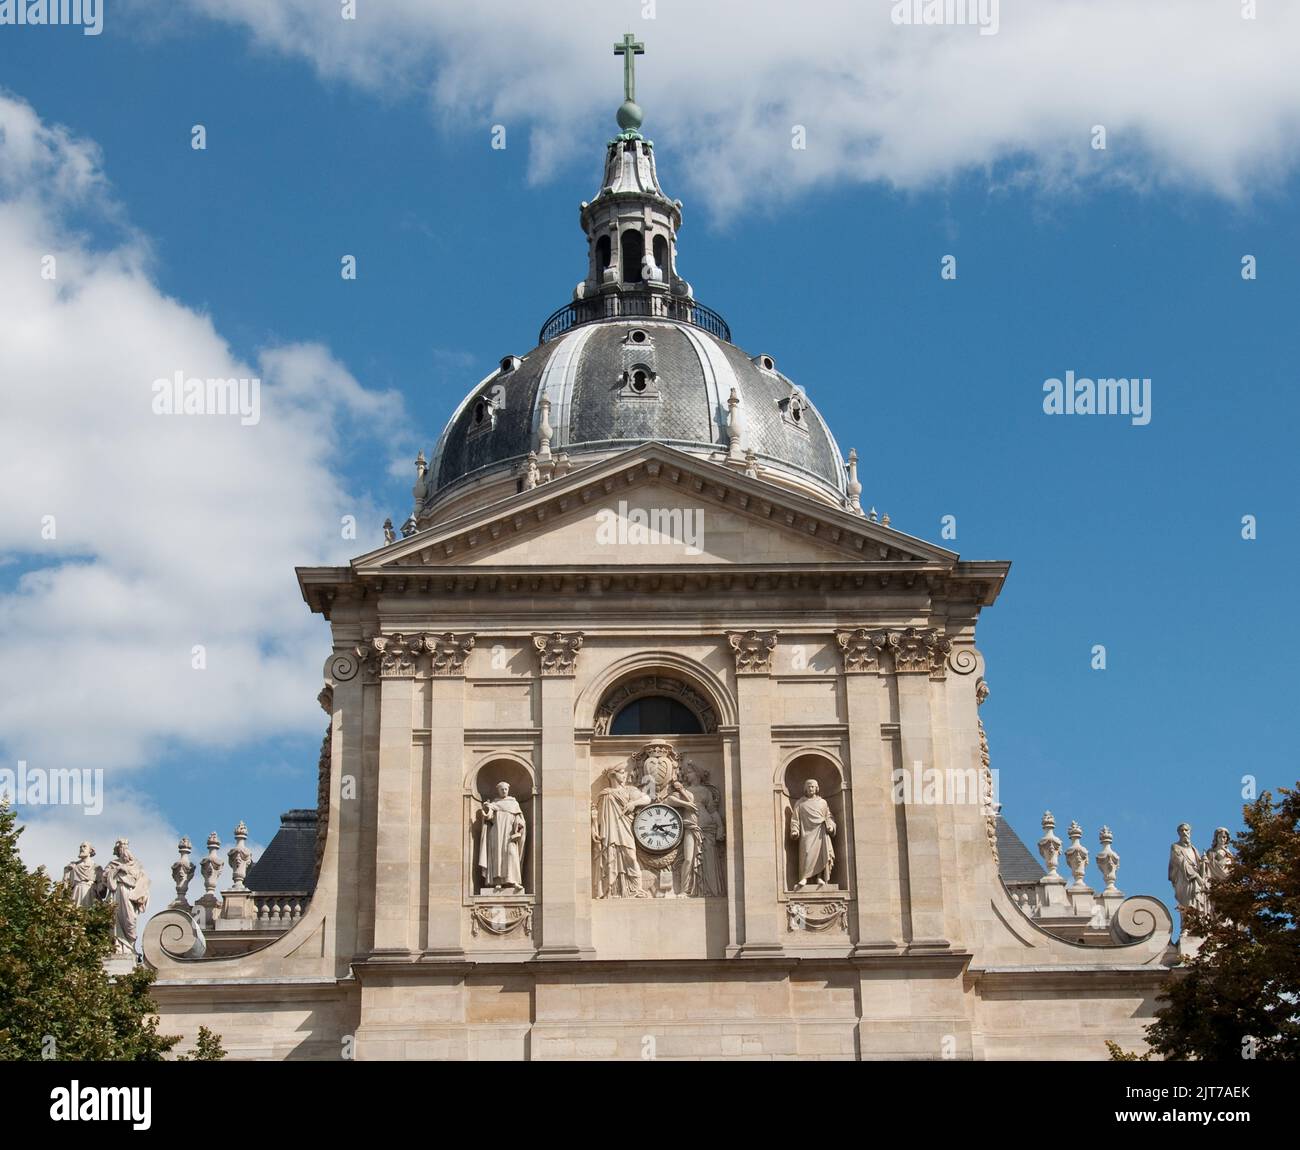 The Sorbonne - University of Paris, Paris, France.  One of the oldest universities in Europe. Stock Photo